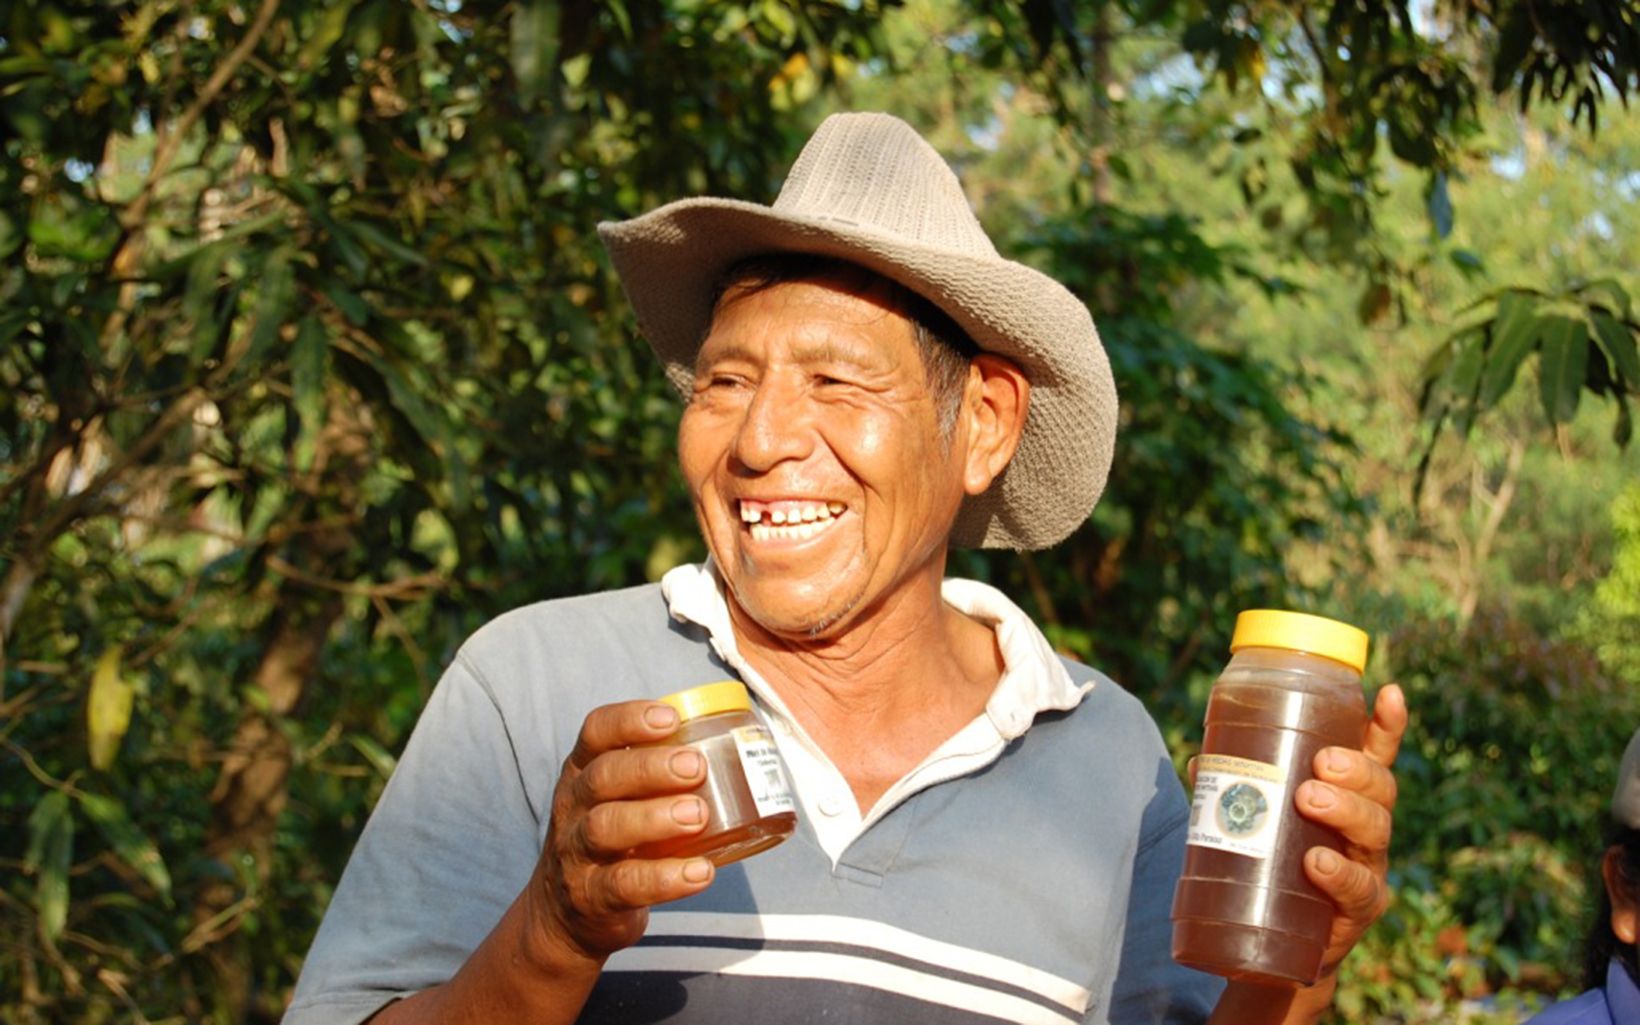 Cattle feces contaminated the drinking water source in Pucará, Bolivia. A water fund now rewards ranchers and farmers who protect lands and streams in the watershed with payments, beehives or irrigation system materials. The program improves water quality and local lives.